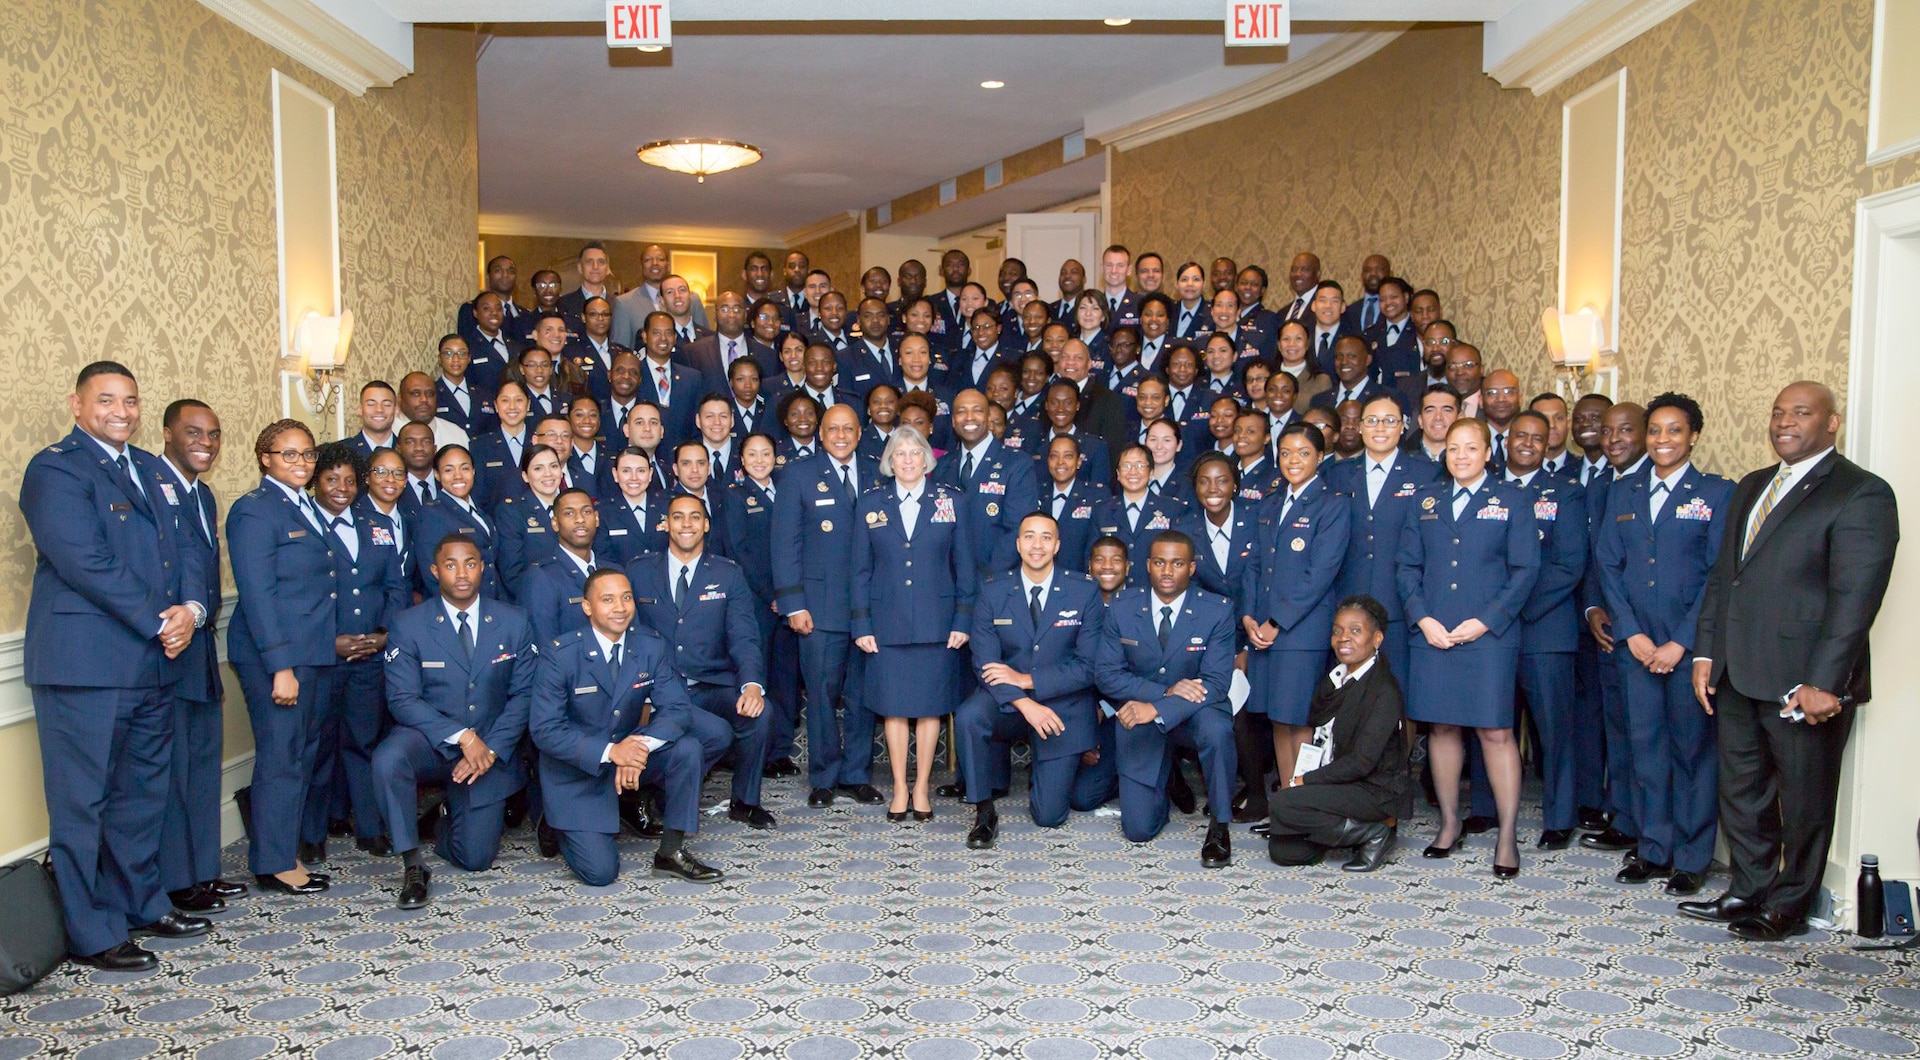 A group of Air Force service members and civil service employees pose for a group photo during a conference.